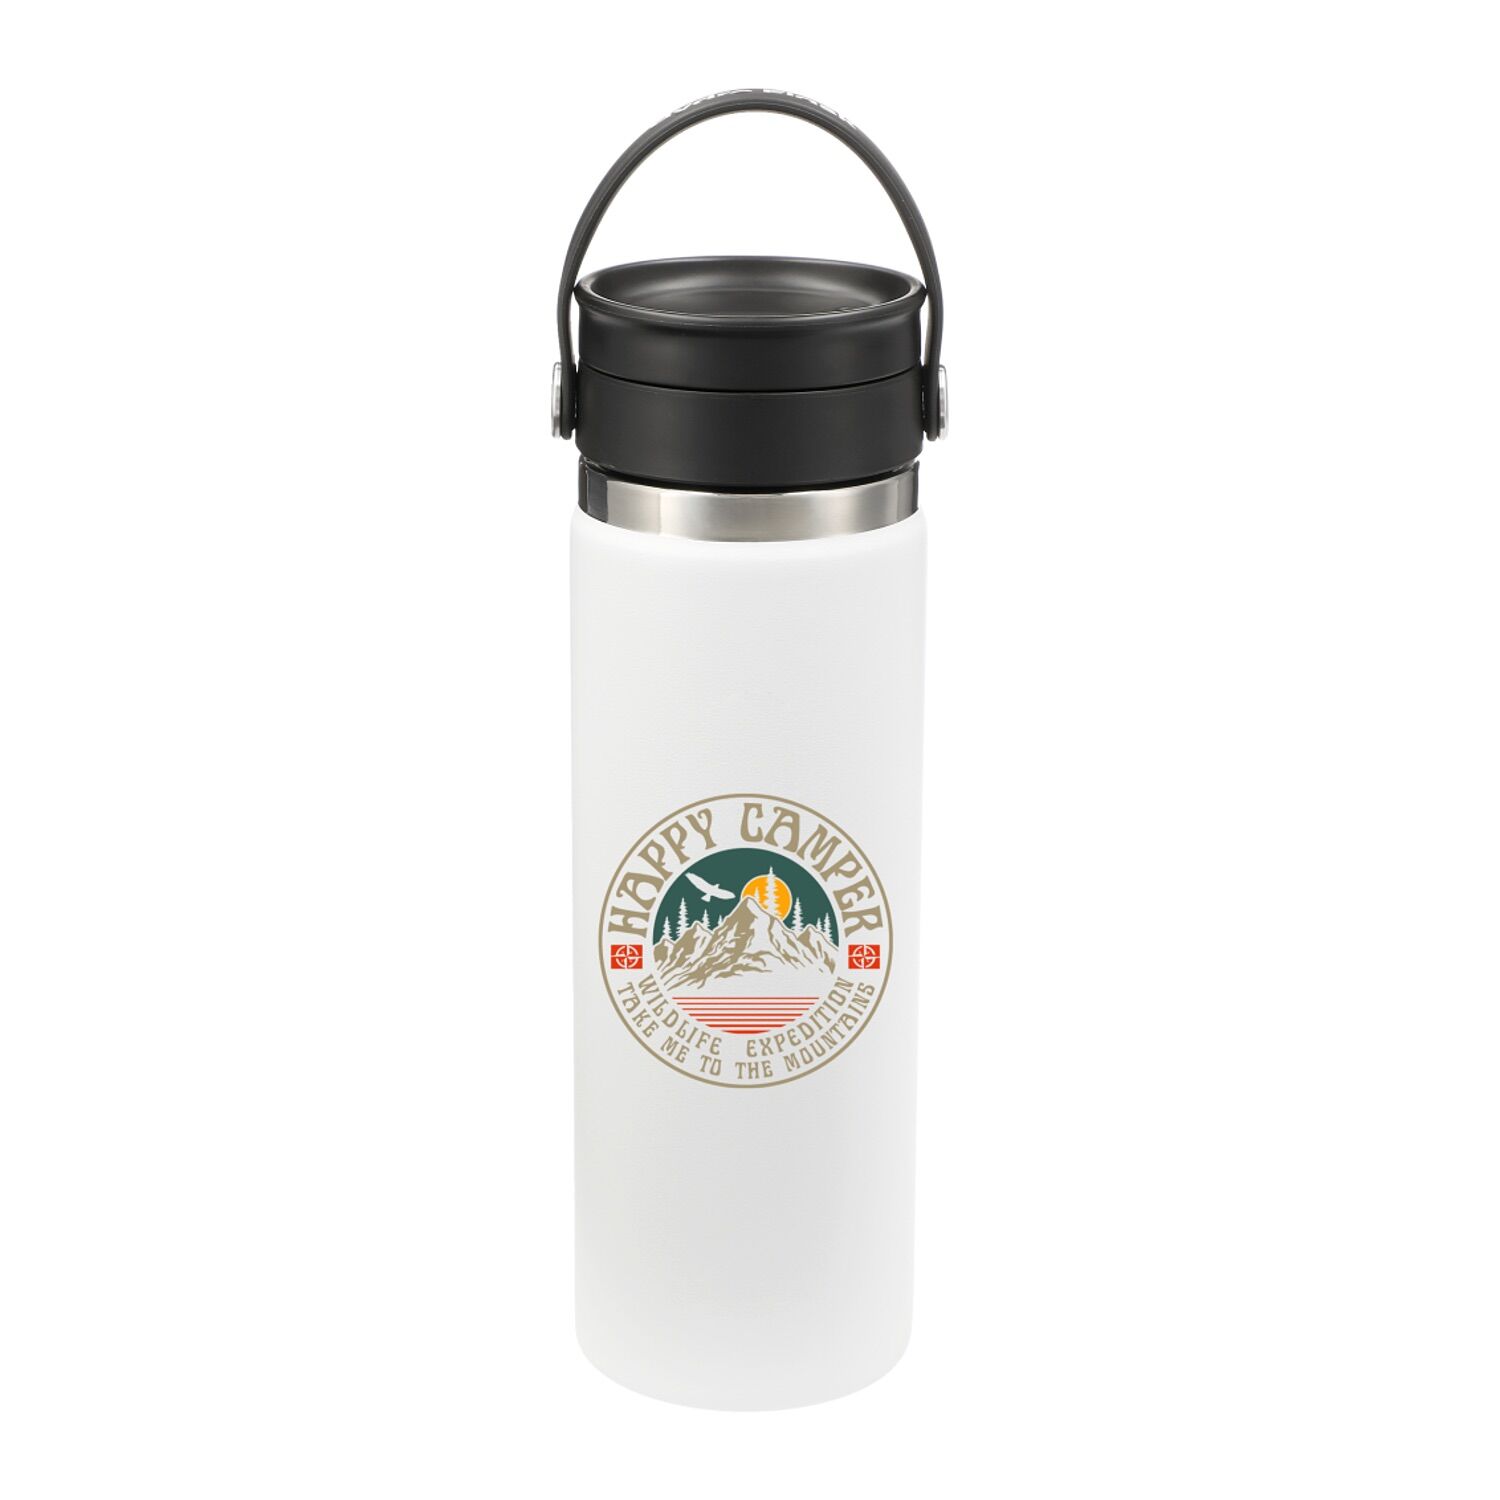 https://www.drivemerch.com/wp-content/uploads/2022/08/branded-hydro-flask-wide-mouth-with-flex-sip-lid-20-oz-white.jpg